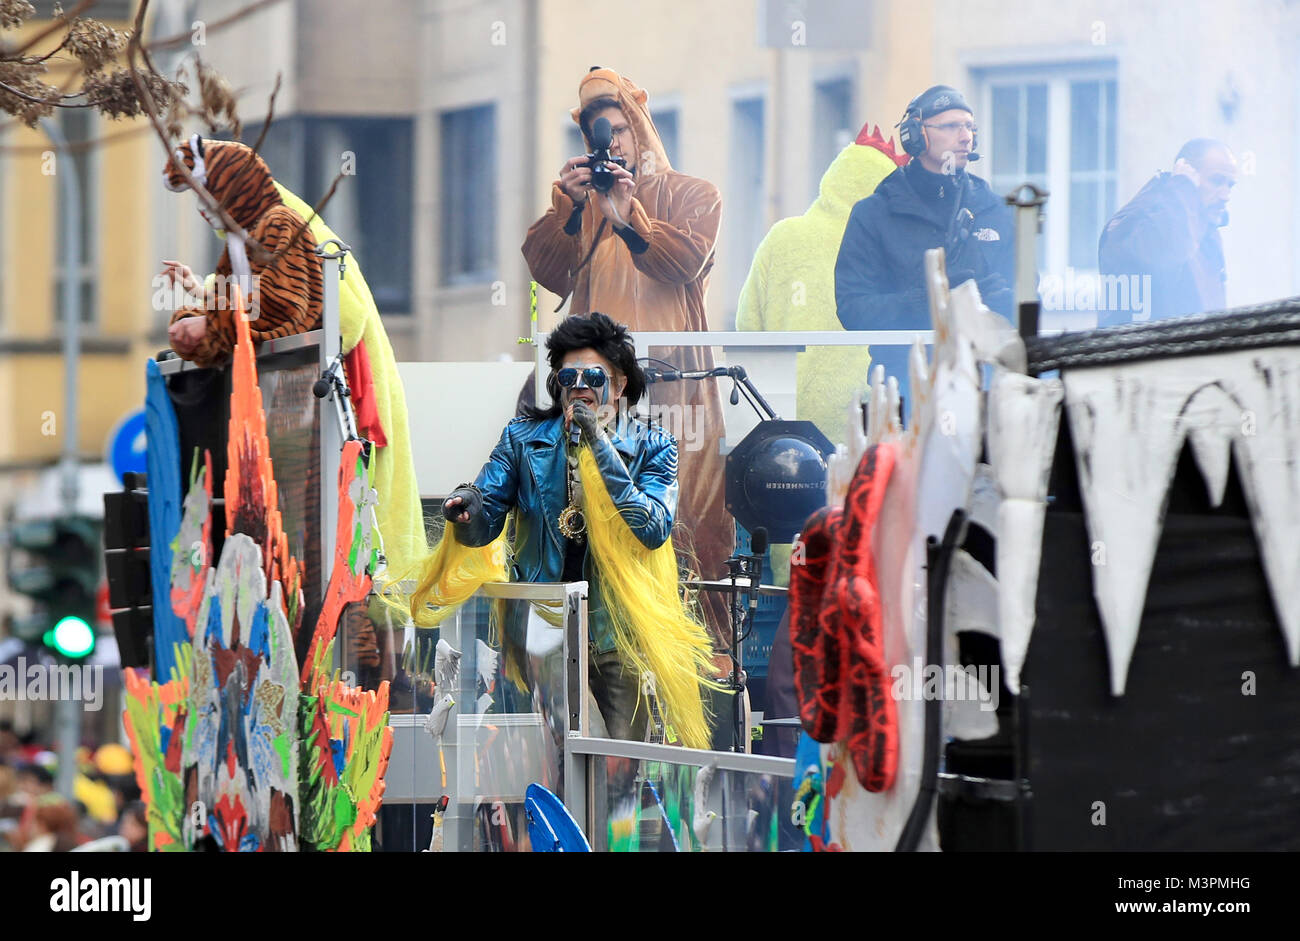 The German band 'Die Toten Hosen' (lit. The Dead Trousers) performs during  a live concert on a caricature float at the Rosenmontag (Shrove Monday)  carnival procession in Duesseldorf, Germany, 12 Febraury 2018.